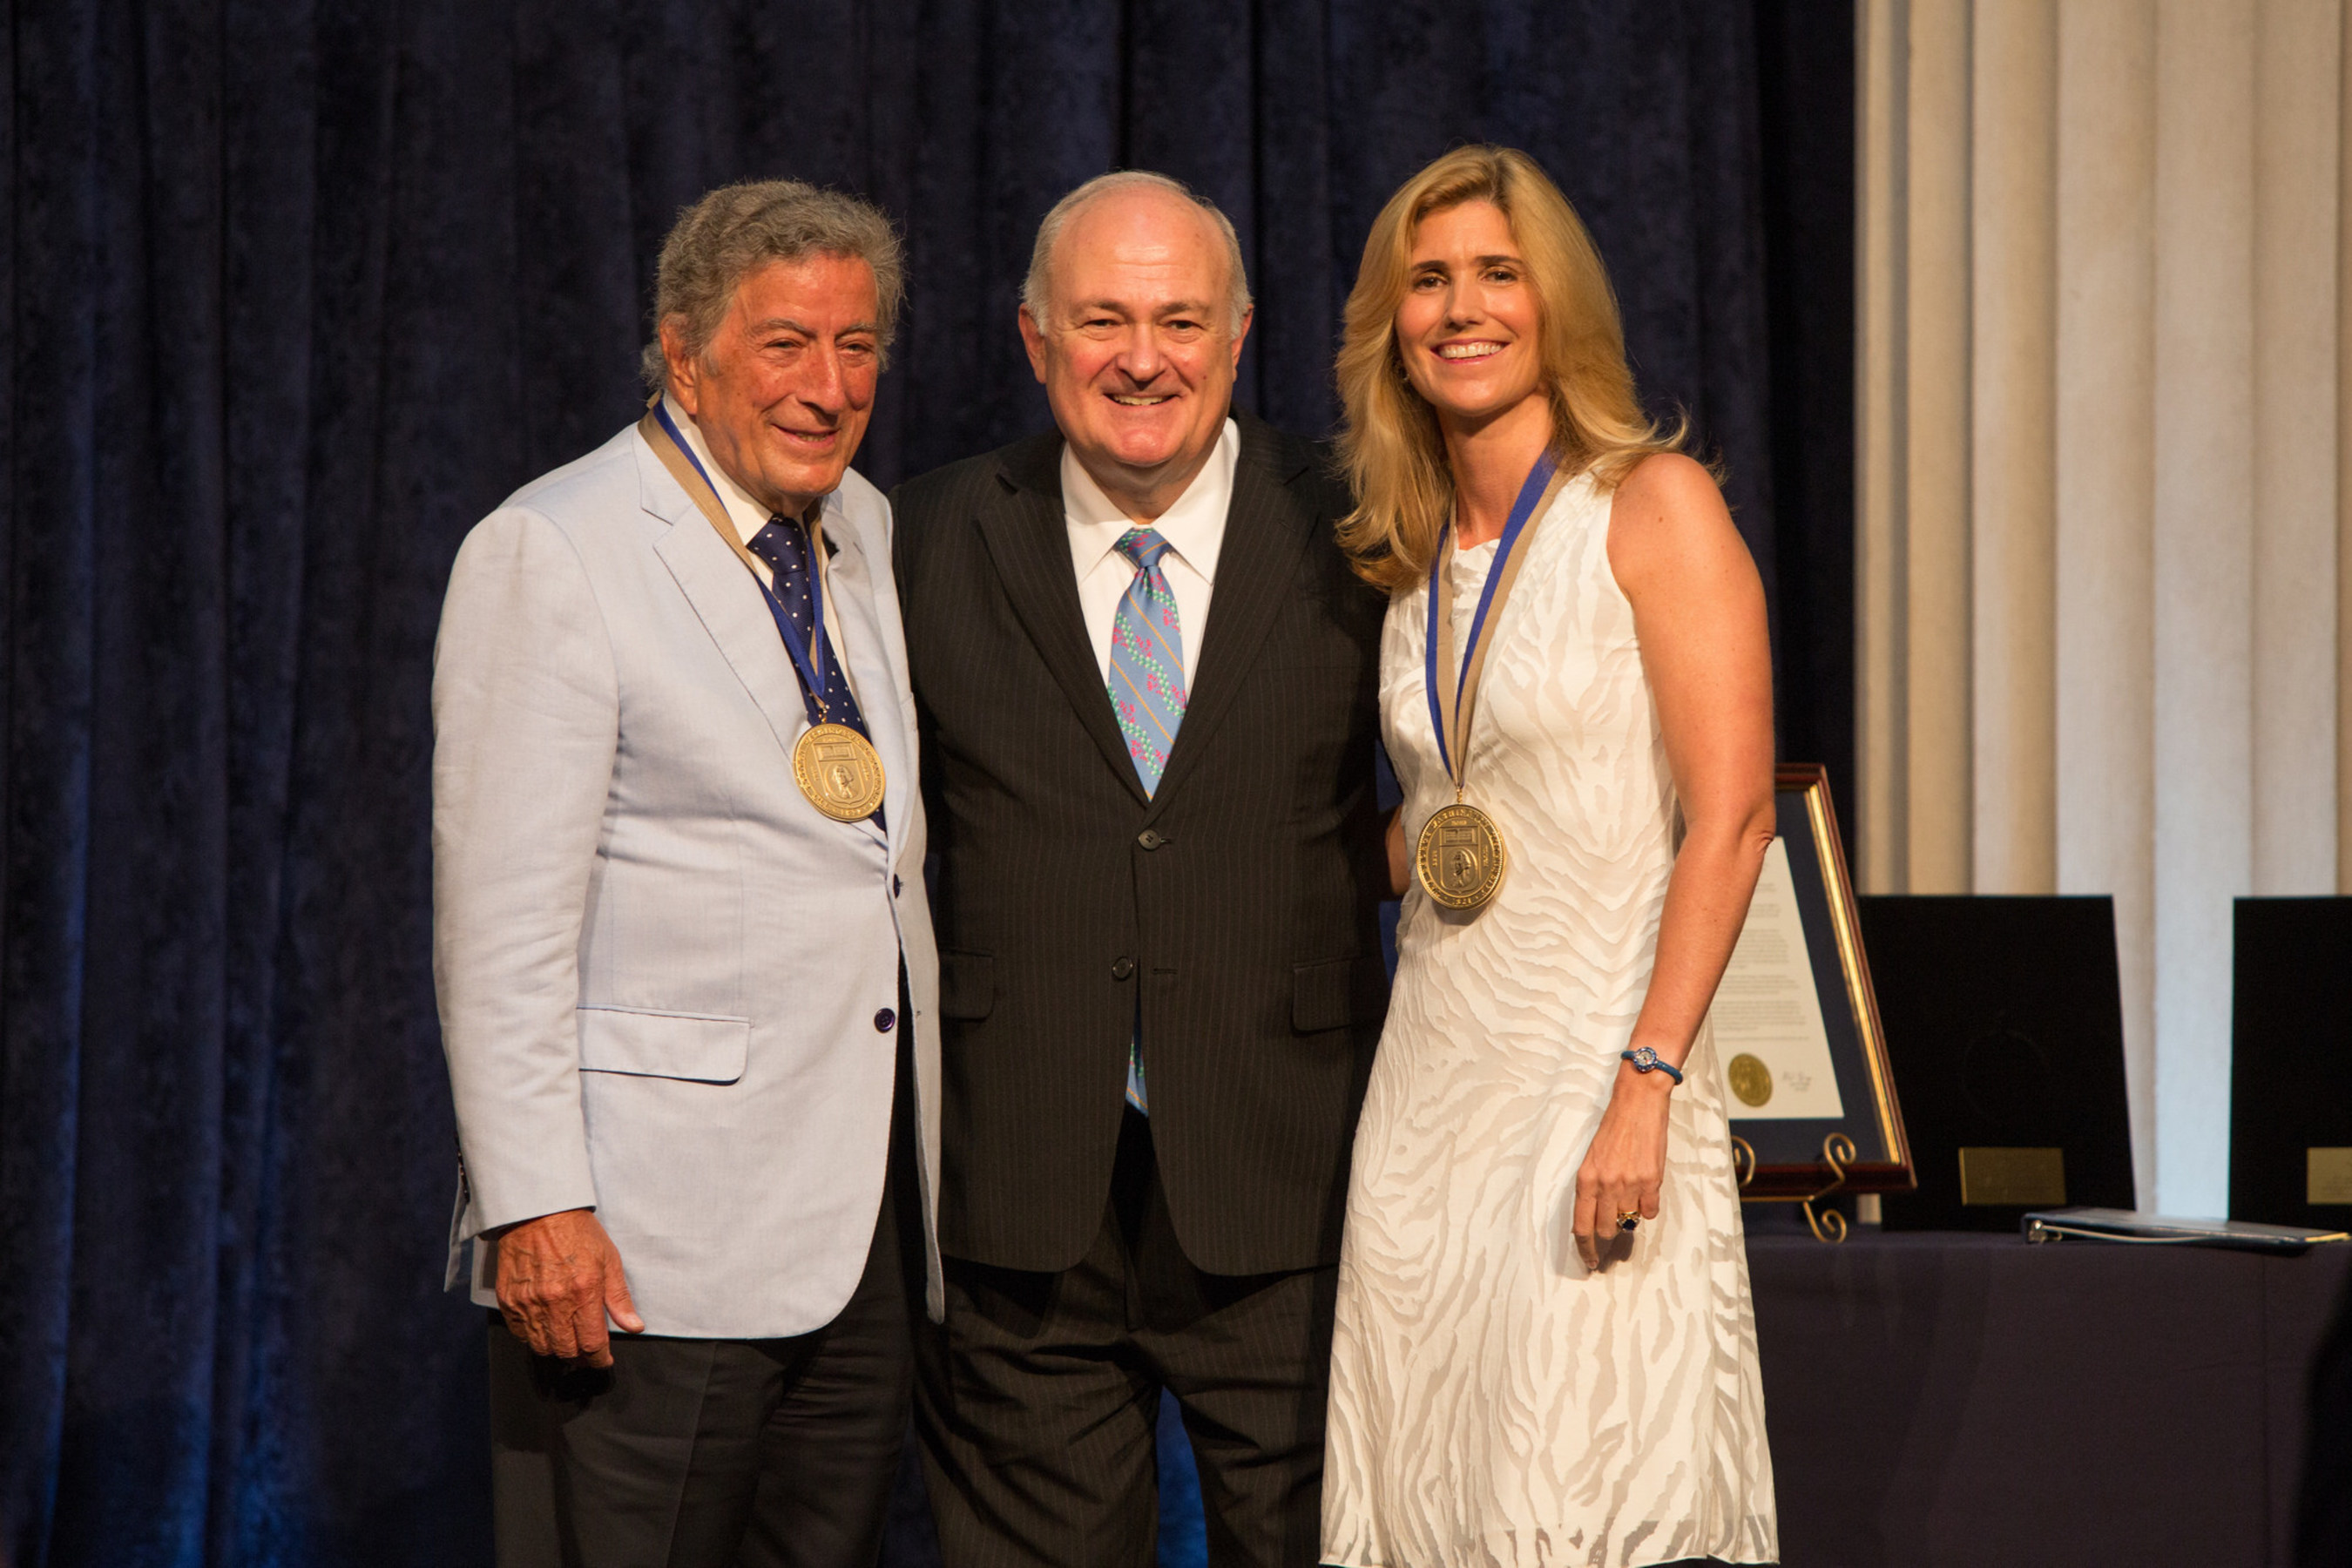 Tony Bennett and his wife Susan Benedetto honored by George Washington University for their commitment to the Arts. (l-r) Bennett, GW President Steven Knapp and Benedetto.